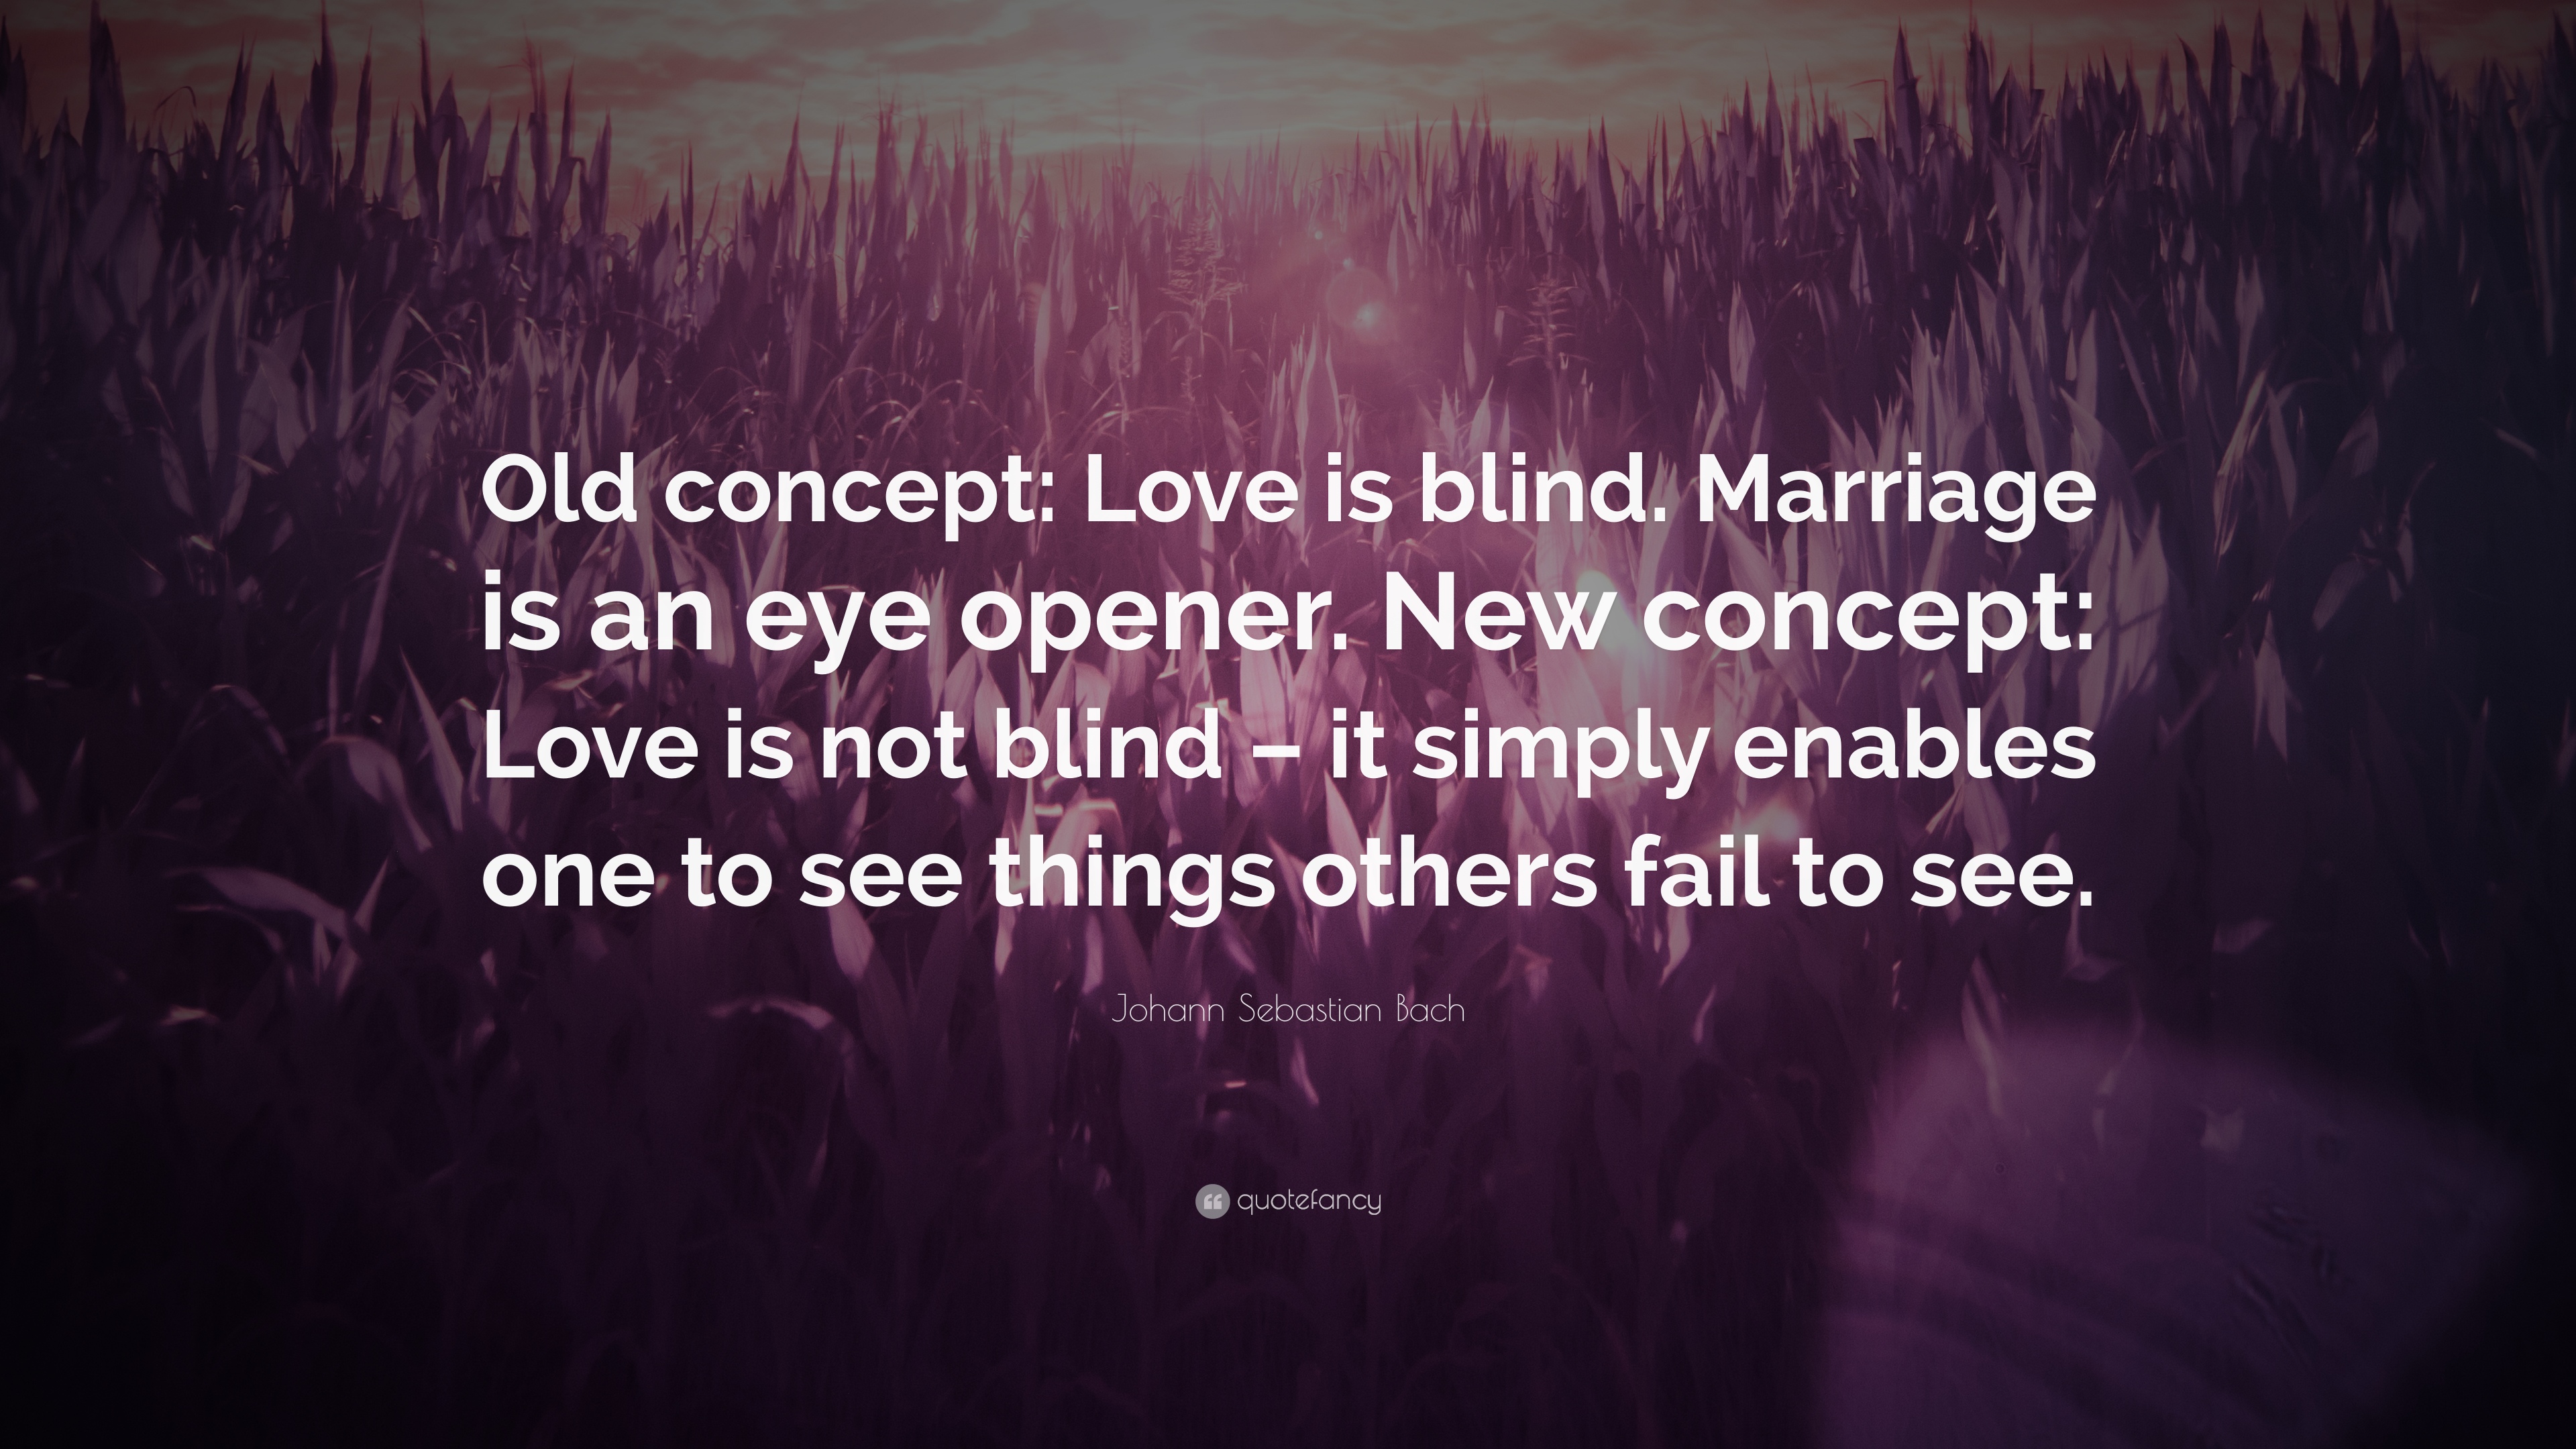 Johann Sebastian Bach Quote: “Old concept: Love is blind. Marriage